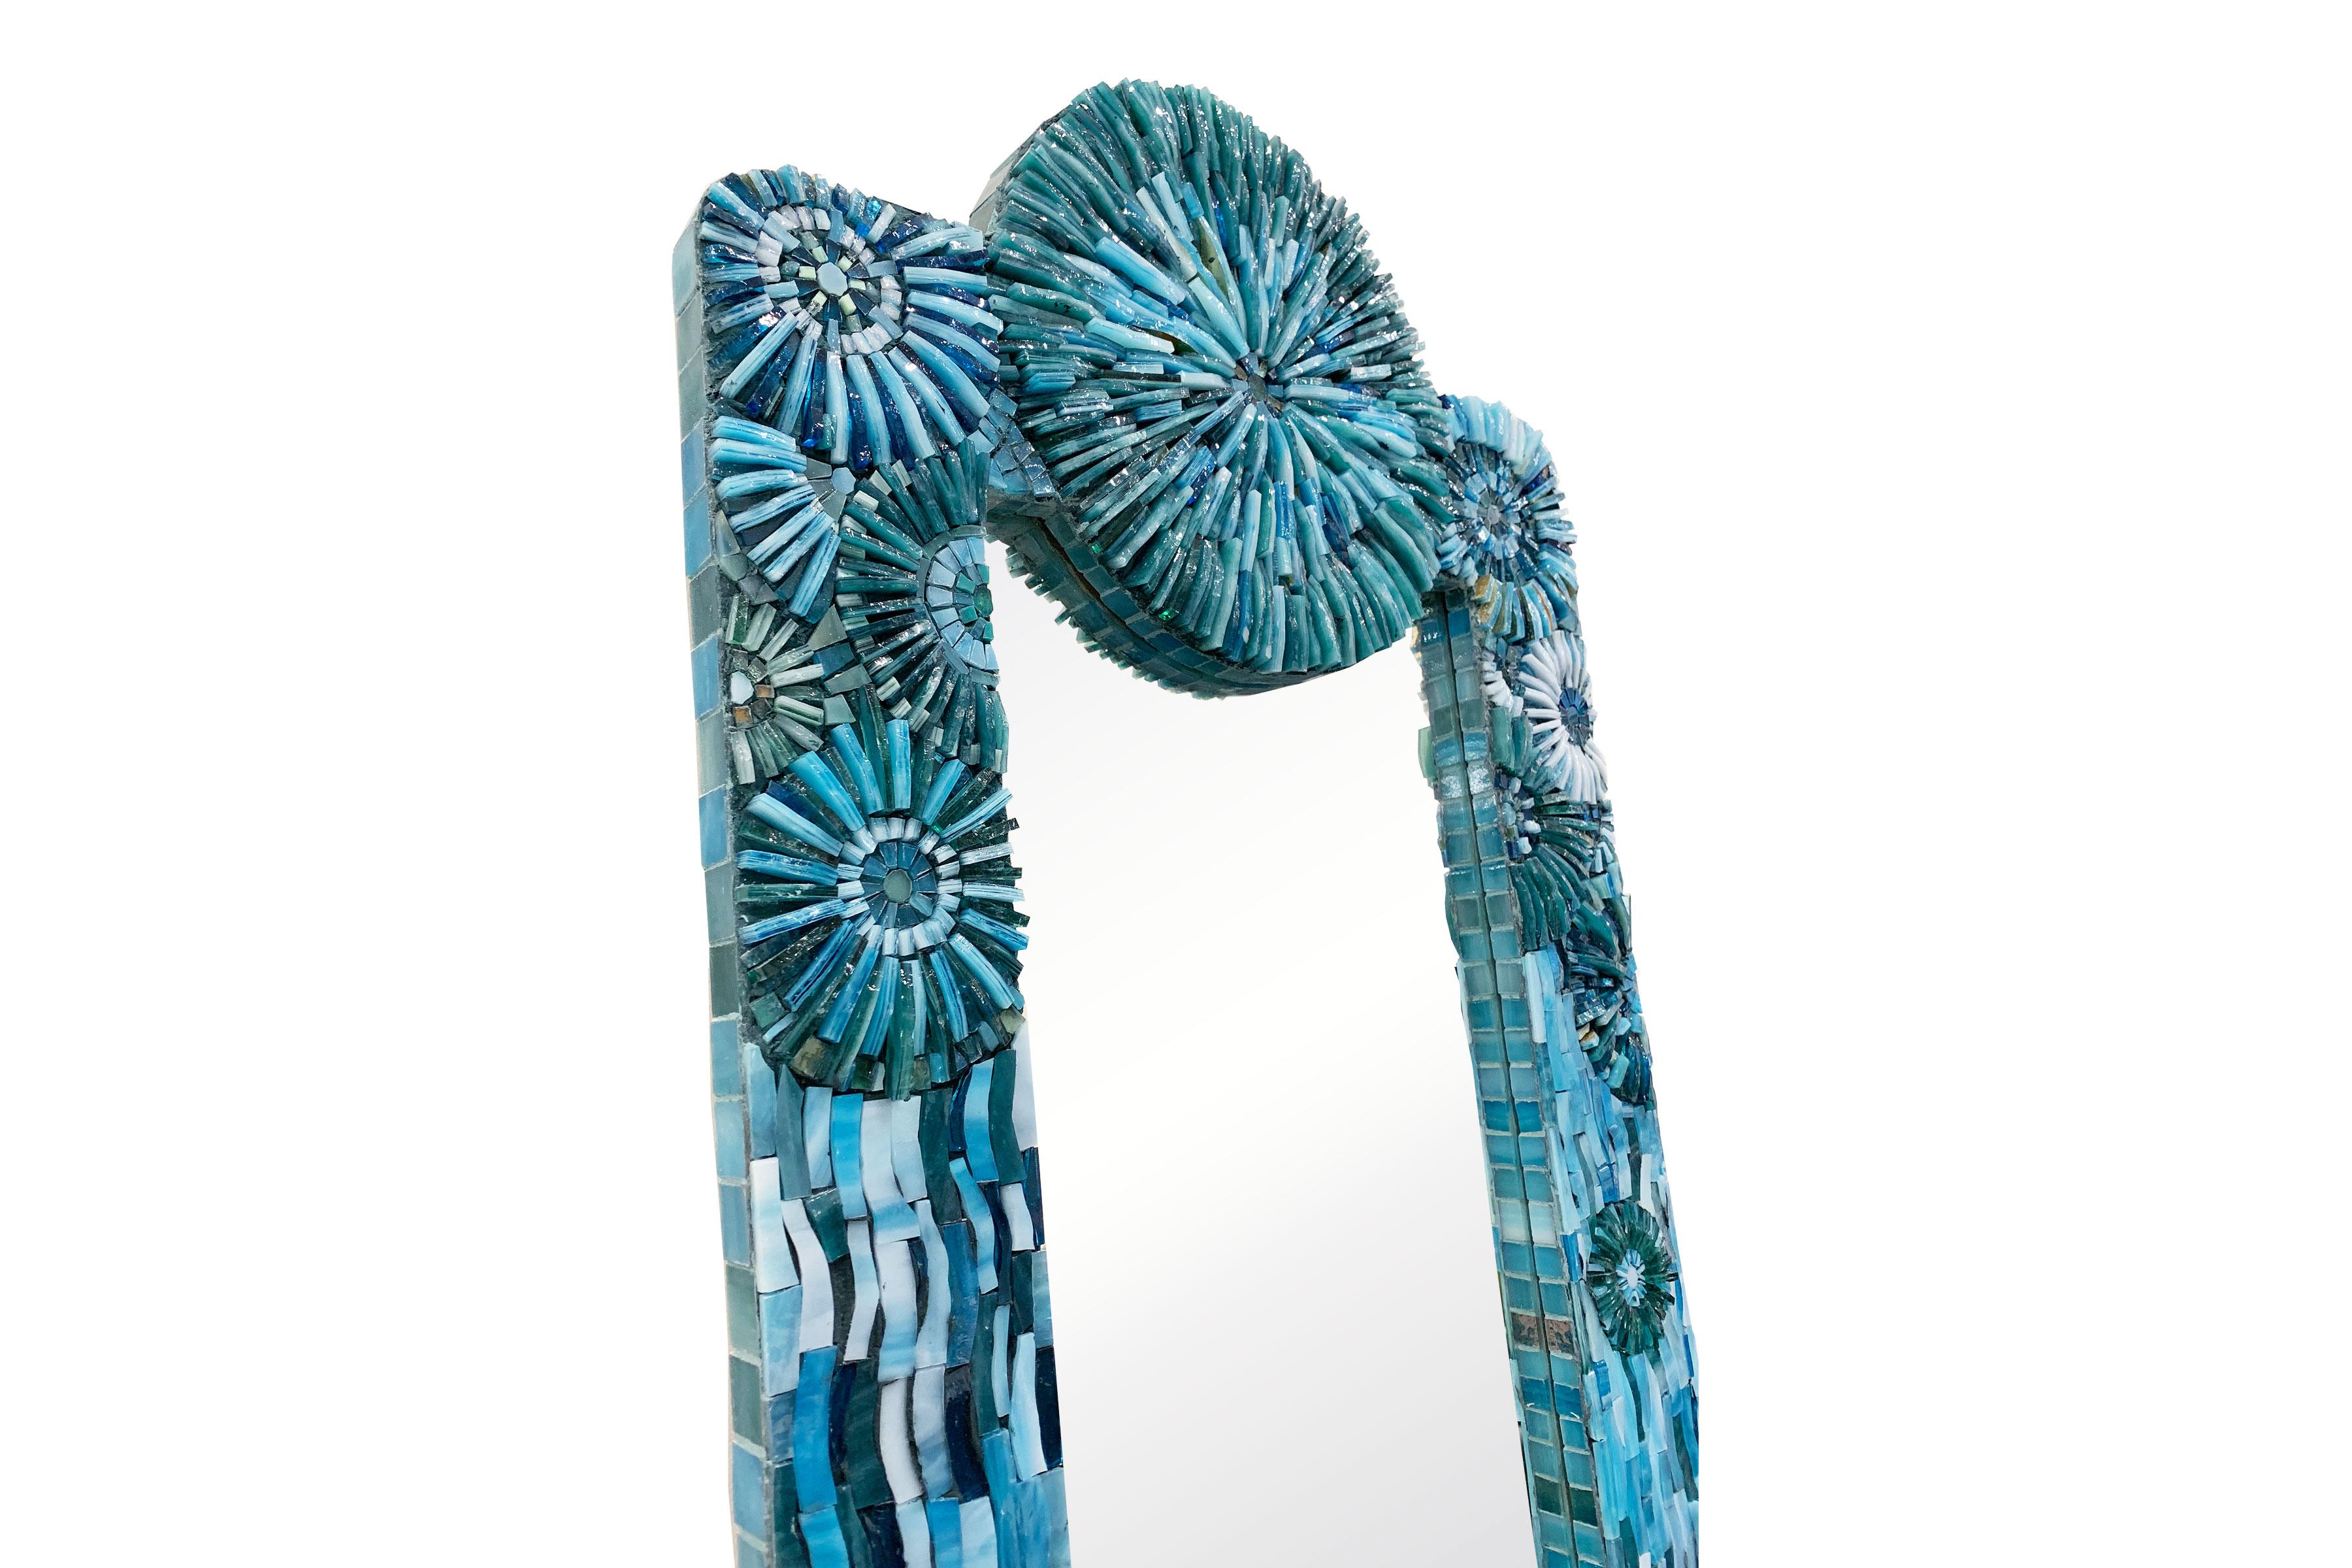 The blossom rectangular mirror by Ercole Home has 3'' border.
Handcut glass mosaic in variety shades in Turquoise decorate the surface in Blossom and shards patterns.
Custom sizes and finishes are available. 
Made in New York City.